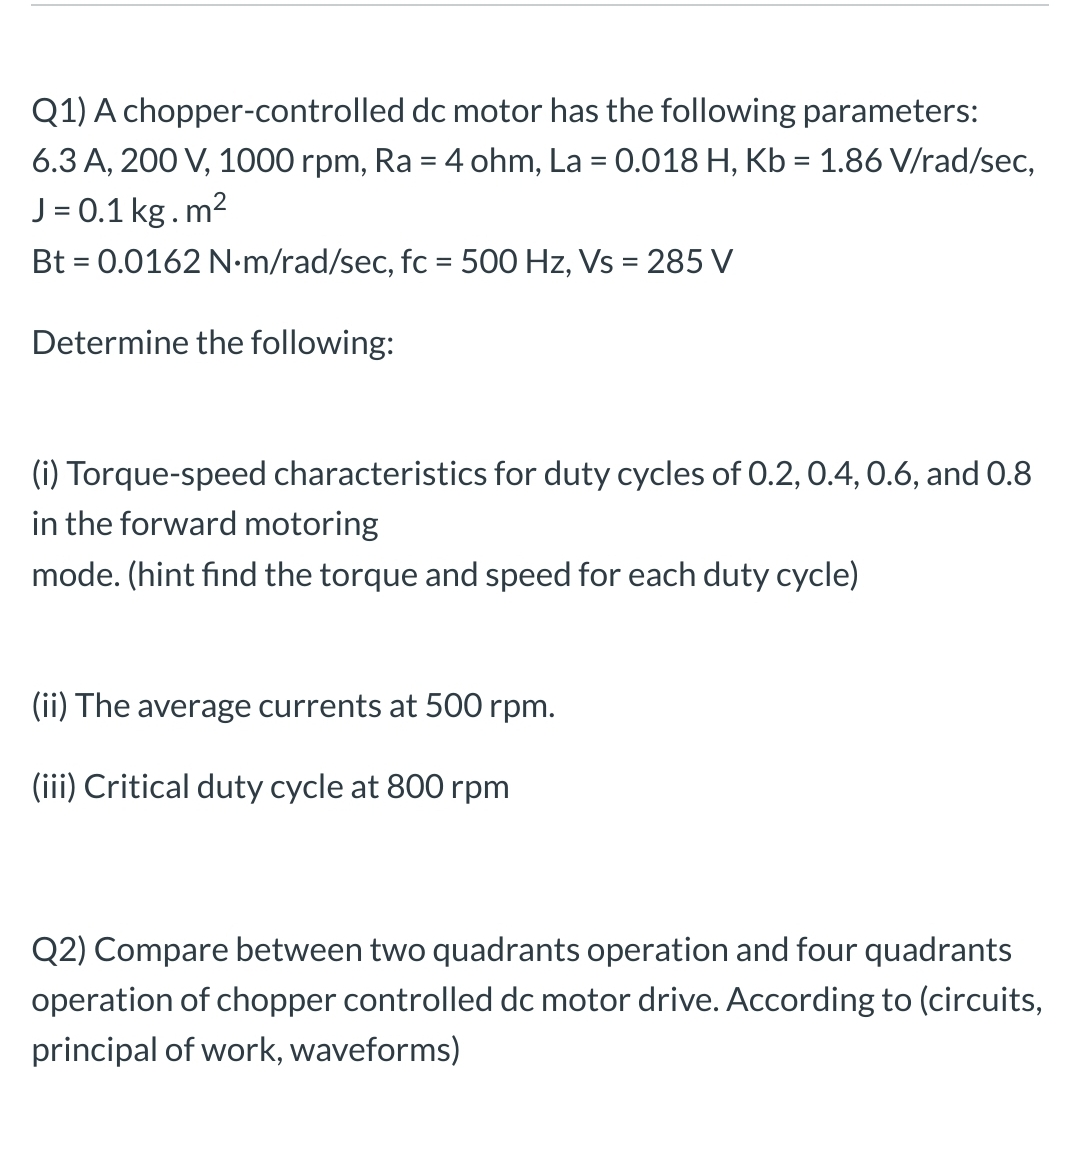 Q1) A chopper-controlled dc motor has the following parameters:
6.3 A, 200 V, 1000 rpm, Ra = 4 ohm, La = 0.018 H, Kb = 1.86 V/rad/sec,
J = 0.1 kg.m2
Bt = 0.0162 N-m/rad/sec, fc = 500 Hz, Vs = 285 V
Determine the following:
(i) Torque-speed characteristics for duty cycles of 0.2, 0.4, 0.6, and 0.8
in the forward motoring
mode. (hint find the torque and speed for each duty cycle)
(ii) The average currents at 500 rpm.
(iii) Critical duty cycle at 800 rpm
Q2) Compare between two quadrants operation and four quadrants
operation of chopper controlled dc motor drive. According to (circuits,
principal of work, waveforms)
